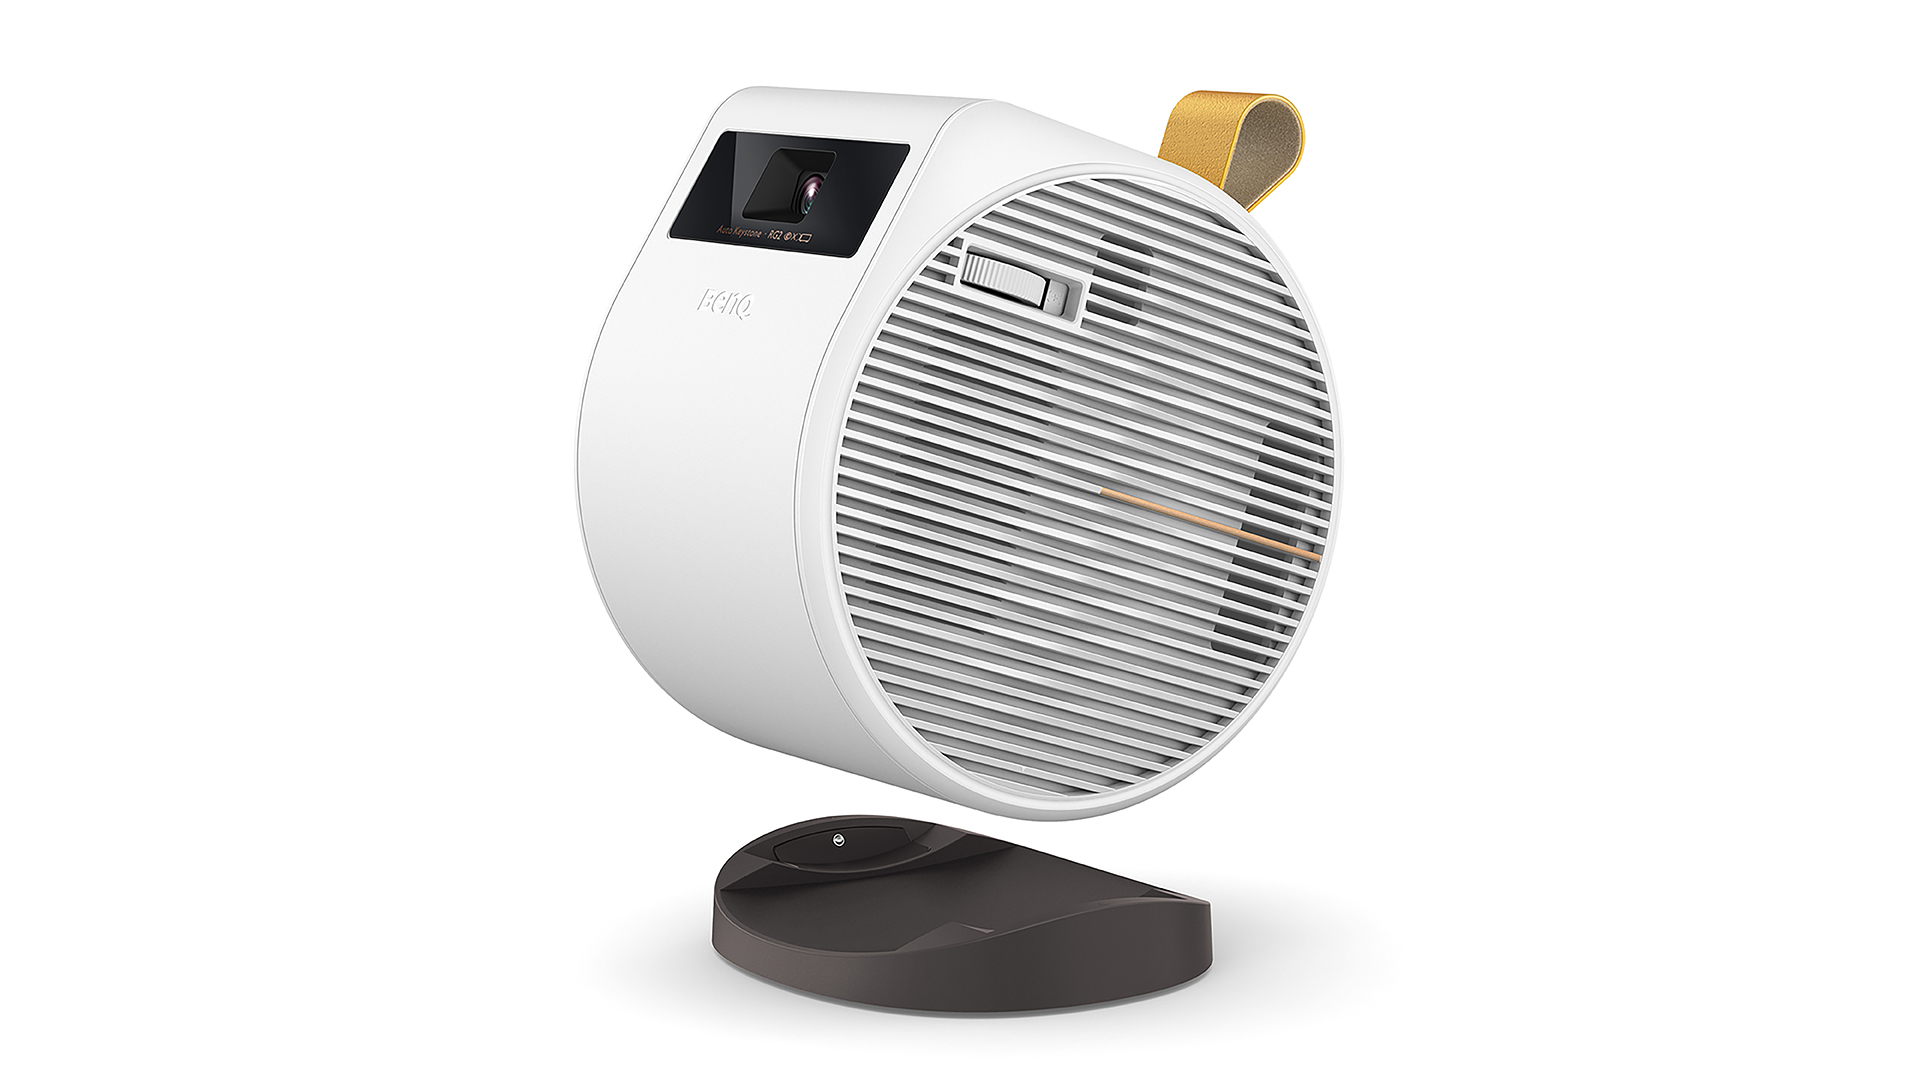 LED Smart Portable Projector 